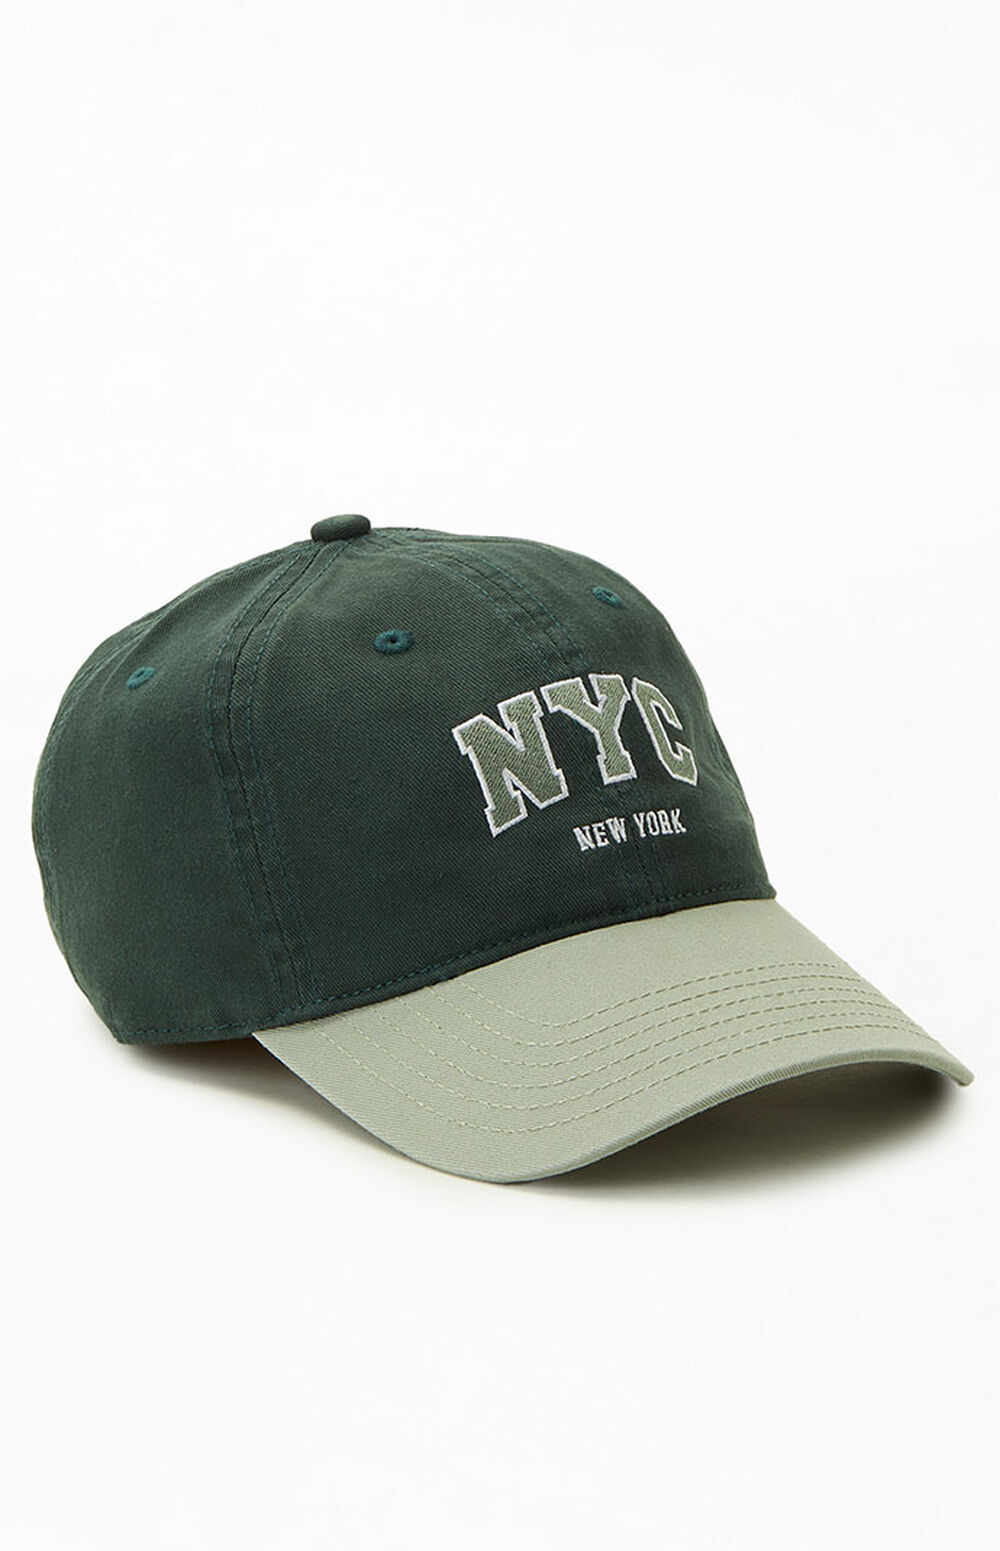 PacSun NYC Sport Dad Hat | PacSun